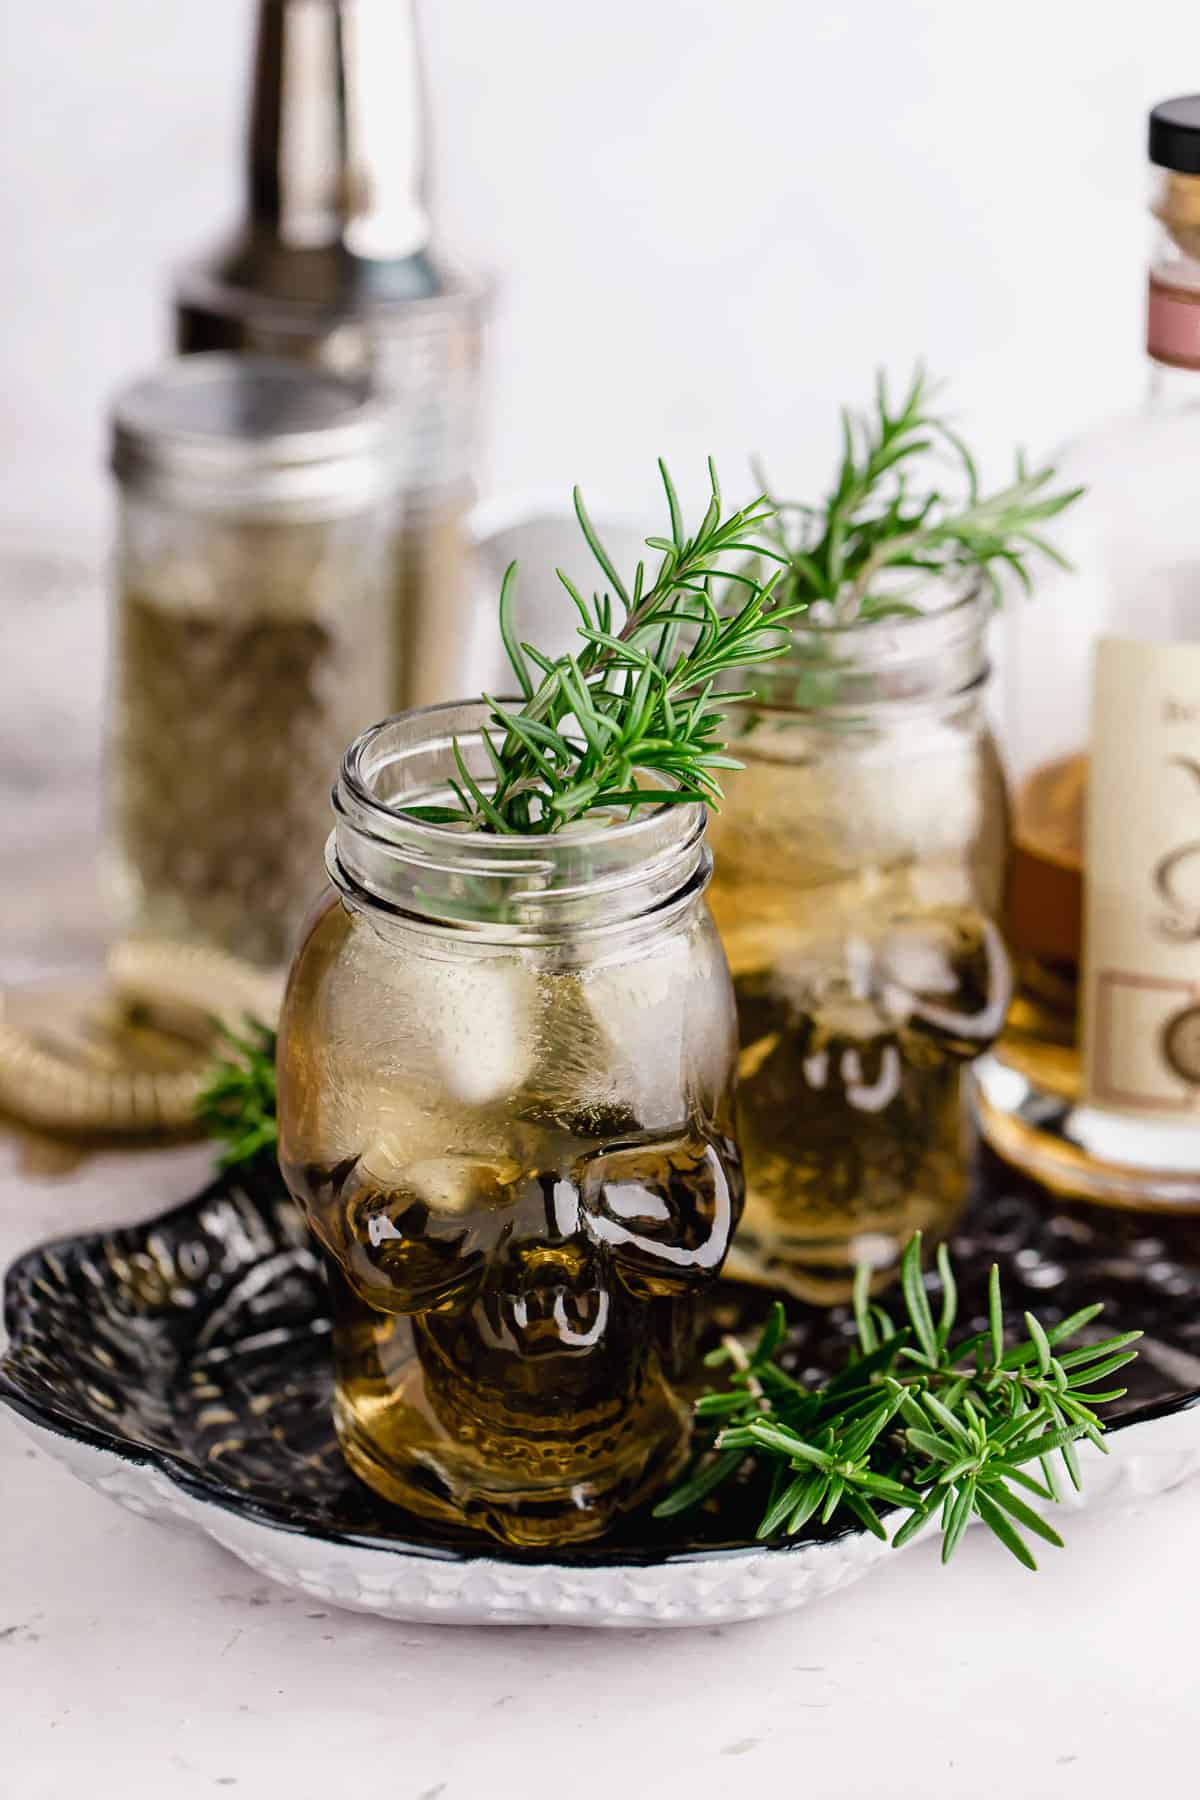 Two grave digger cocktails with fresh rosemary garnish.